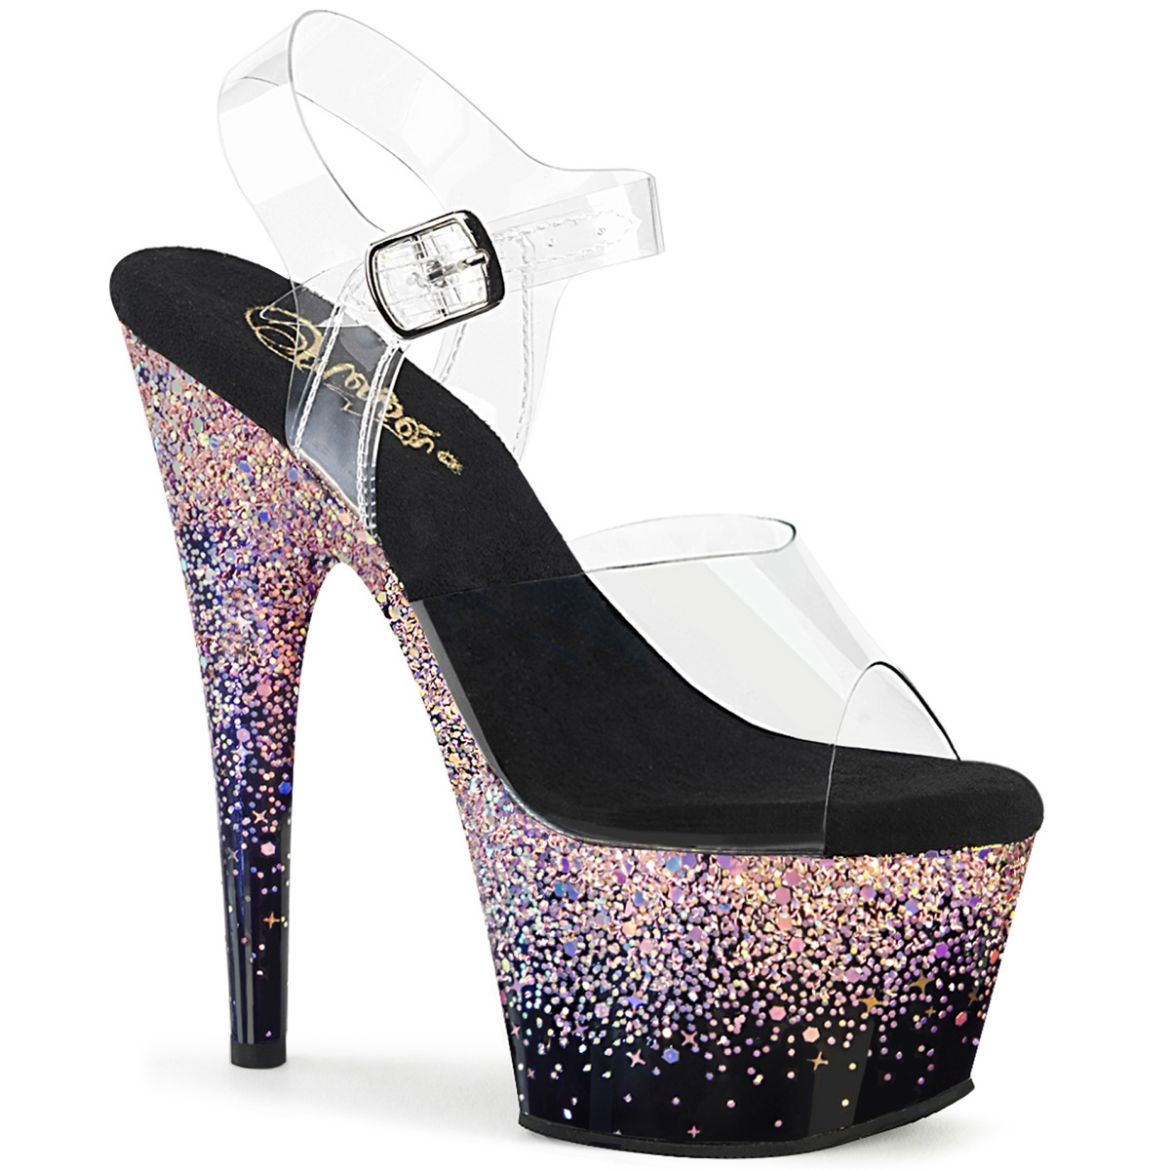 Product image of Pleaser ADORE-708SS Clr/Blk-Dusty Blush Multi Glitter 7 Inch Heel 2 3/4 Inch PF Ankle Strap Sandal